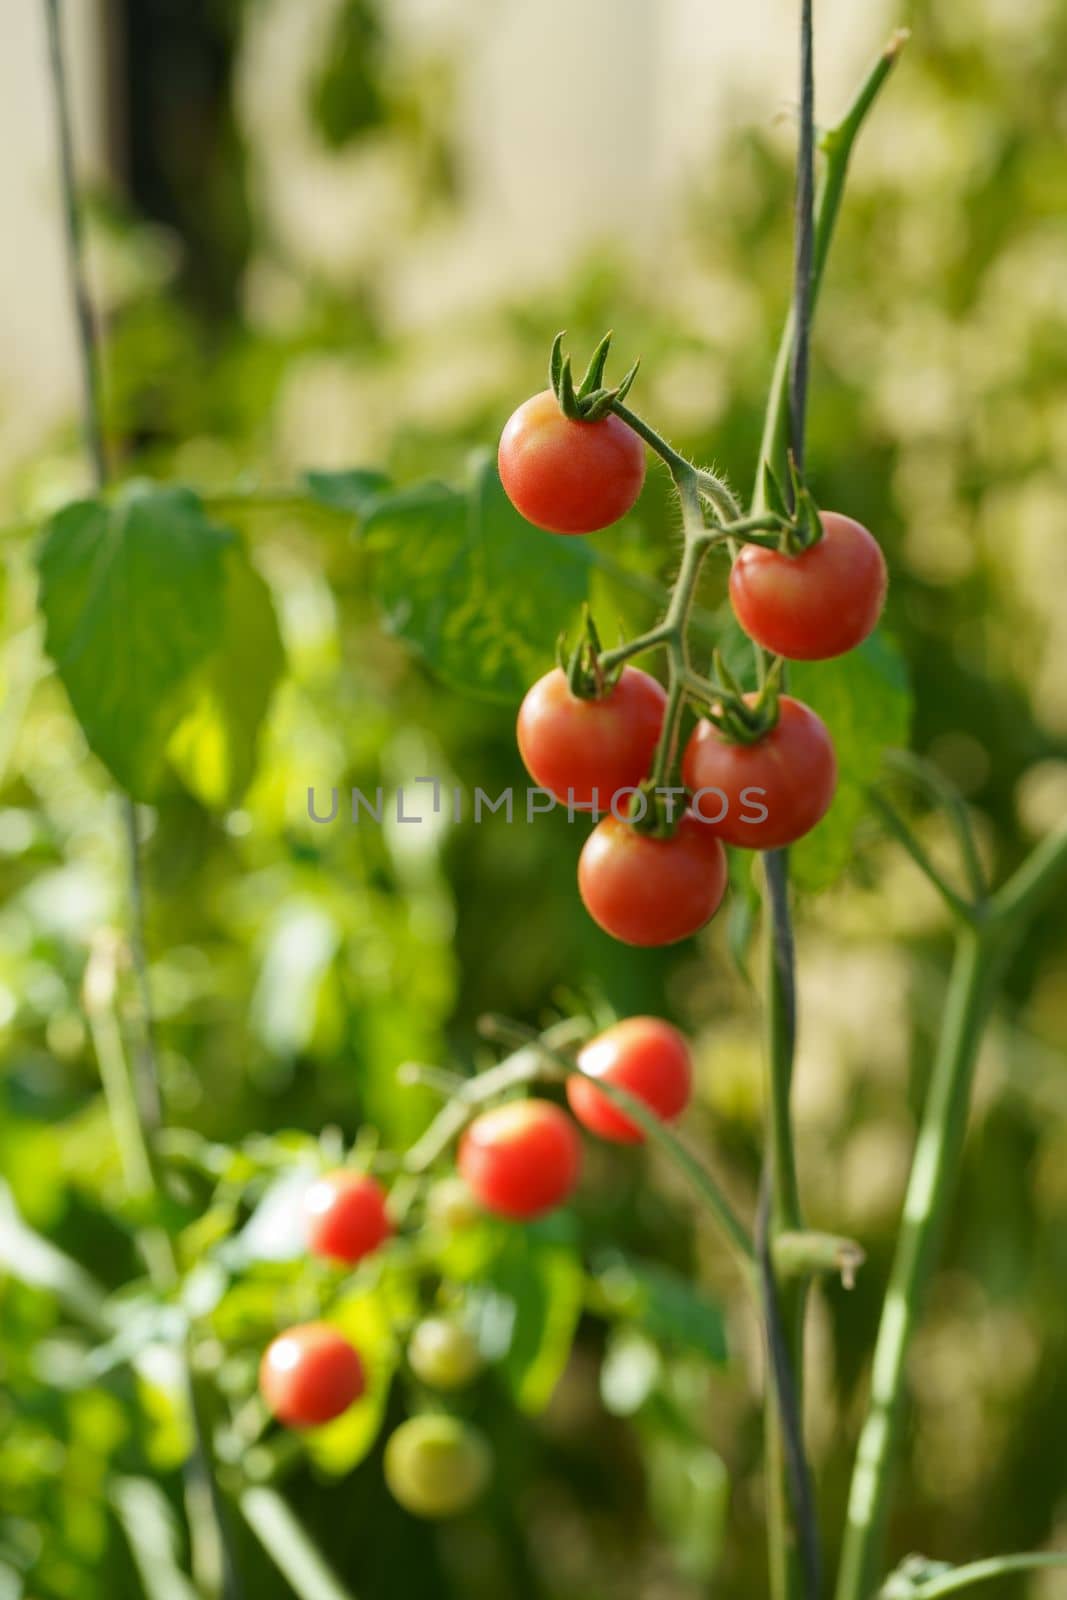 Beautiful red ripe tomatoes grown in a greenhouse. Delicious red tomatoes hanging on the vine of a tomato plant